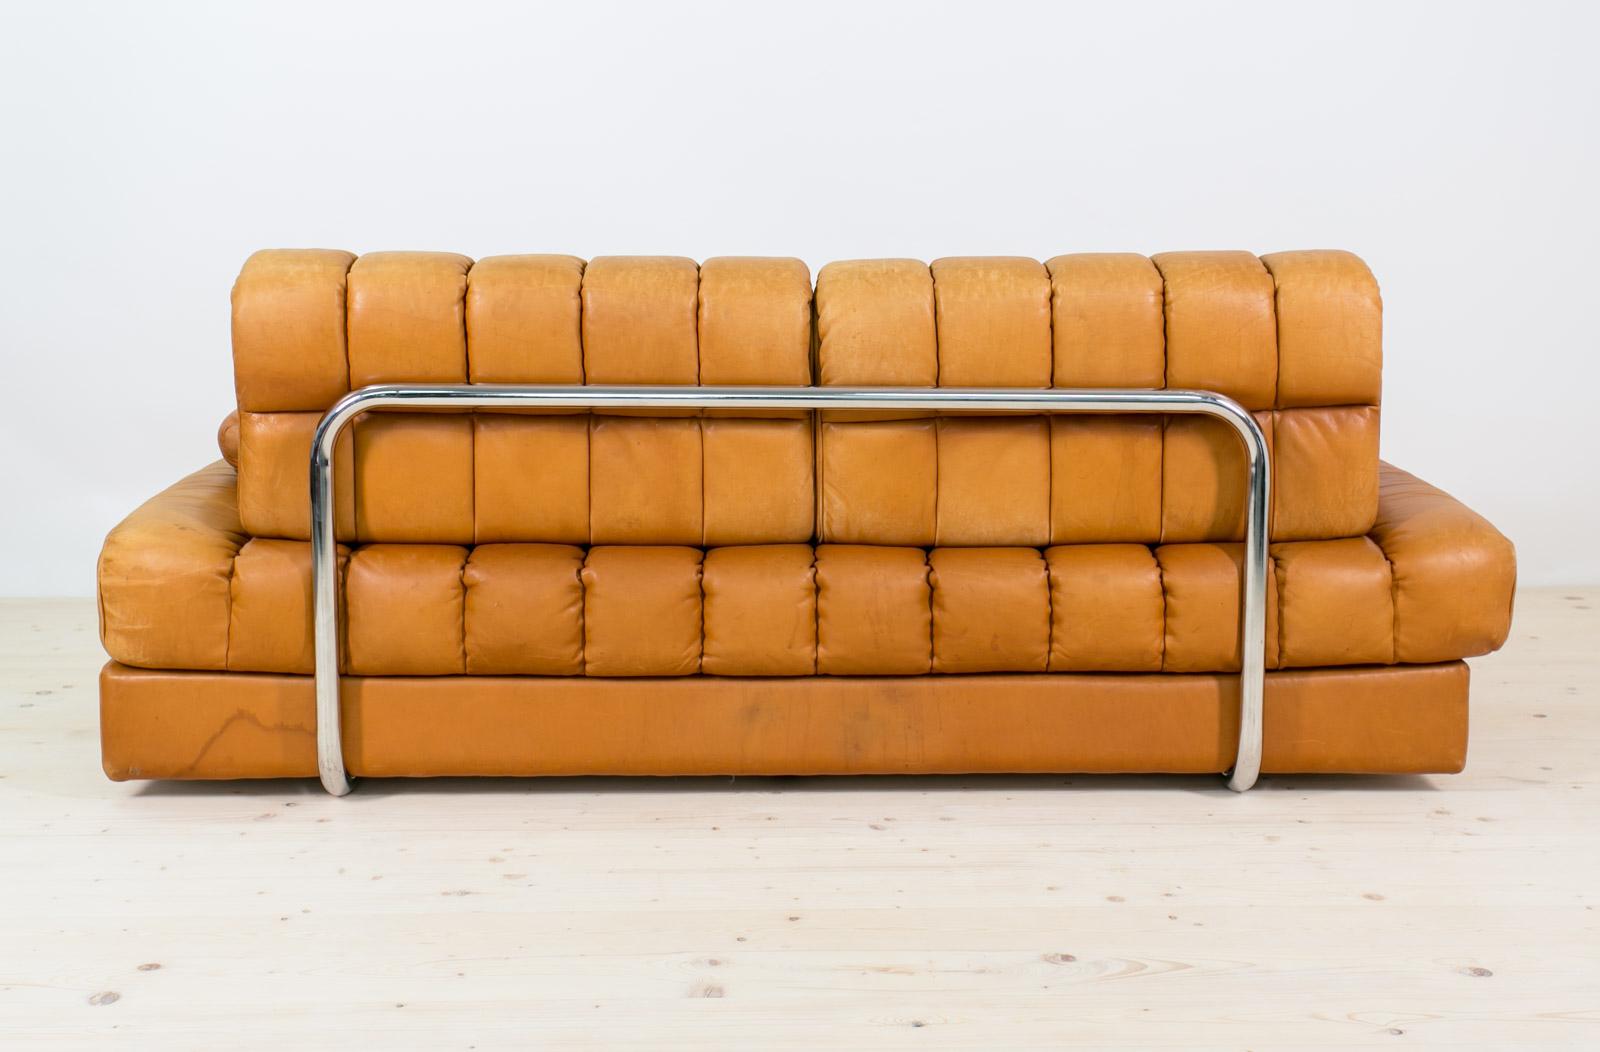 Vintage Swiss De Sede Sofa Bed from the 1960s, model DS 85 3